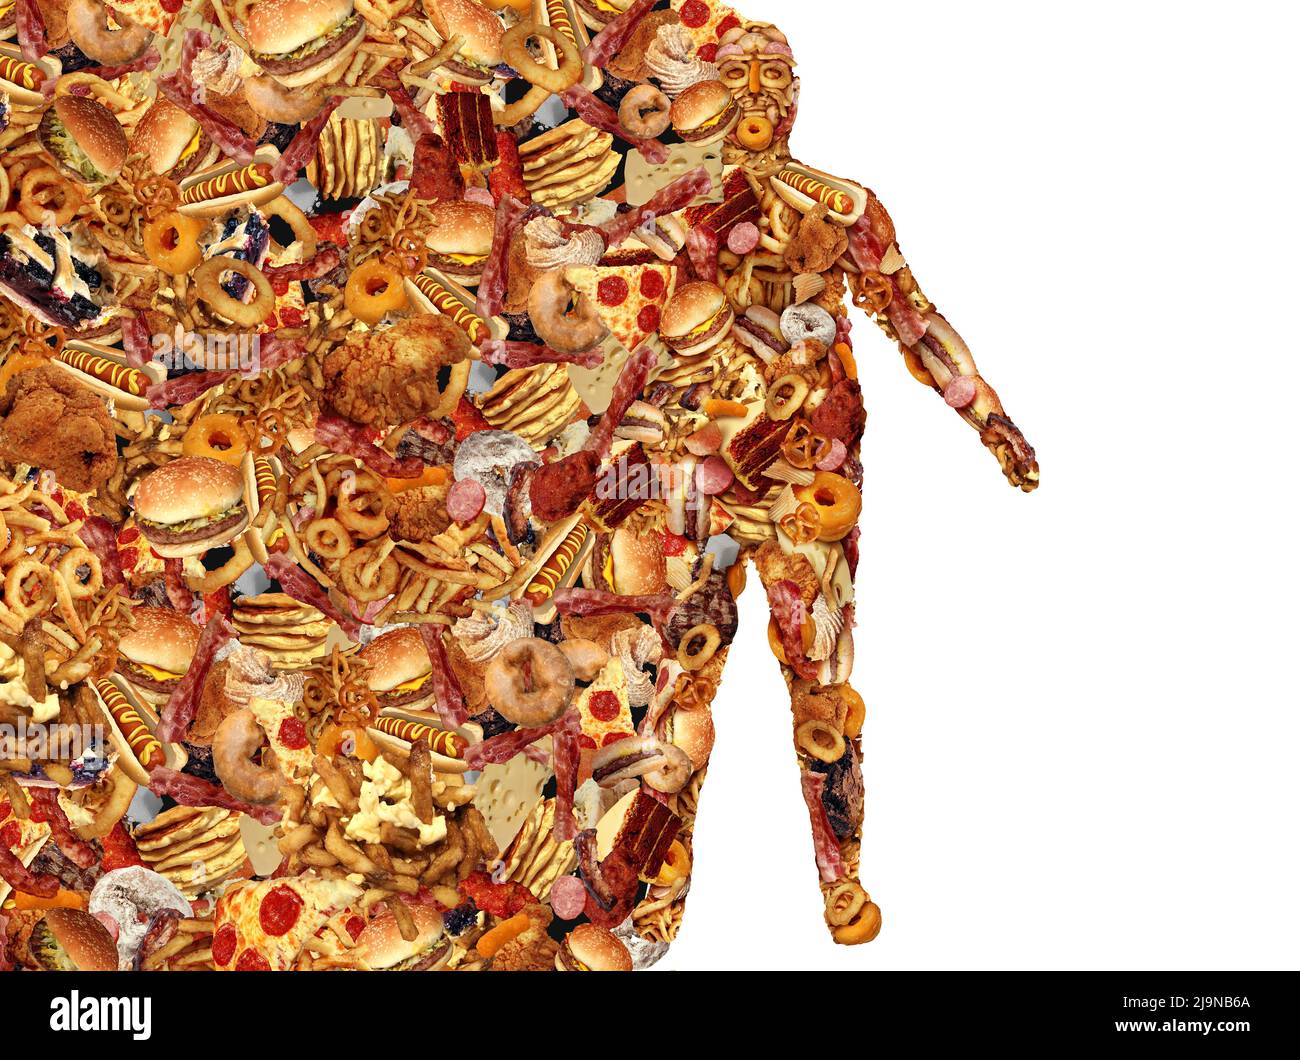 Fast Food and the Human body made of junkfood as a nutrition and dietary health problem concept as an obese person or obesity and diabetes symbol. Stock Photo